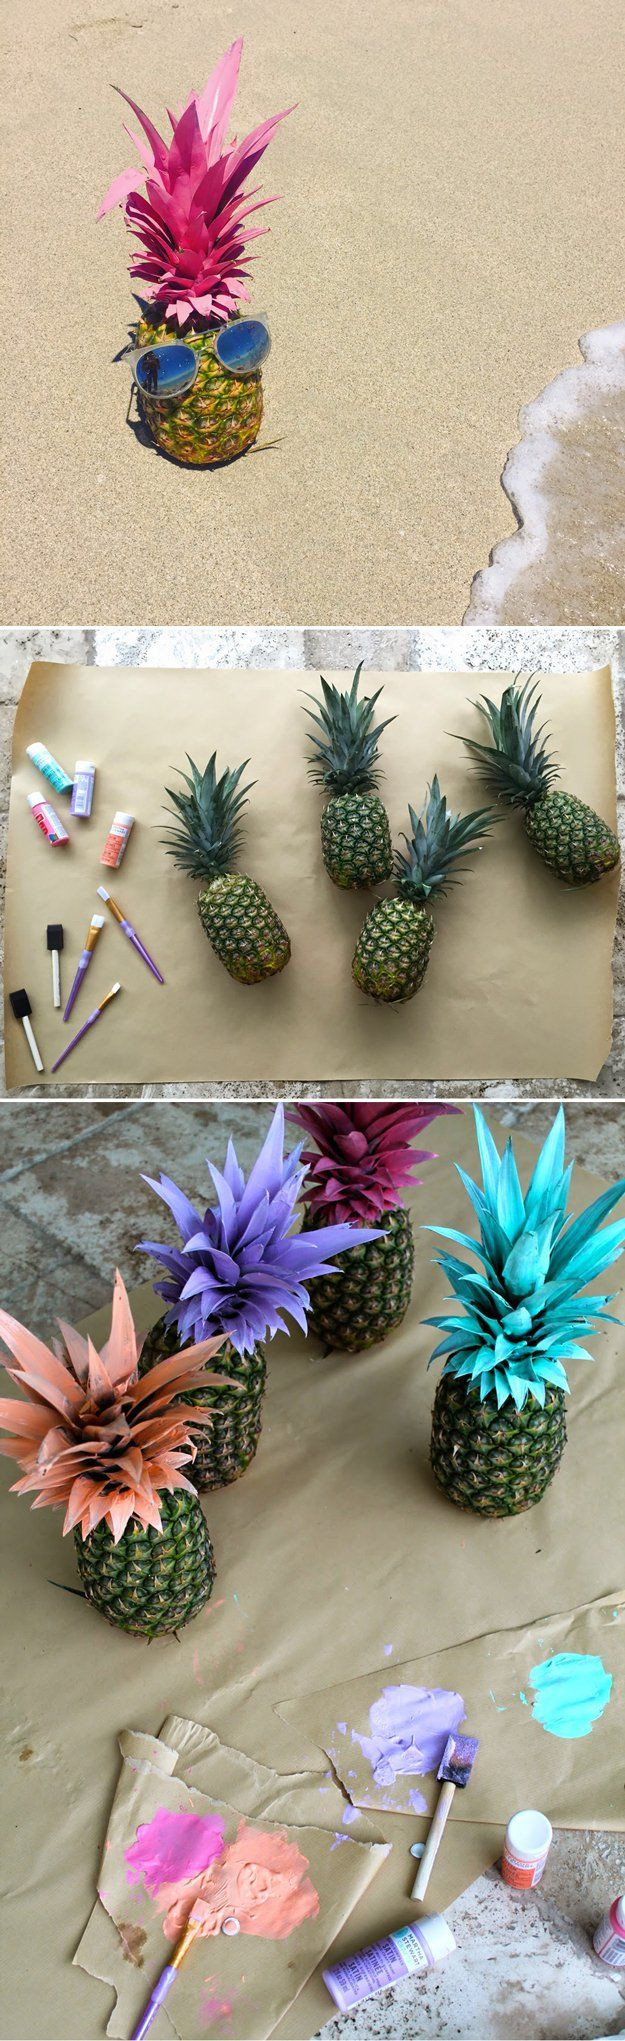 Inexpensive DIY Luau Party Decorations
 262 best images about Tiki Party on Pinterest